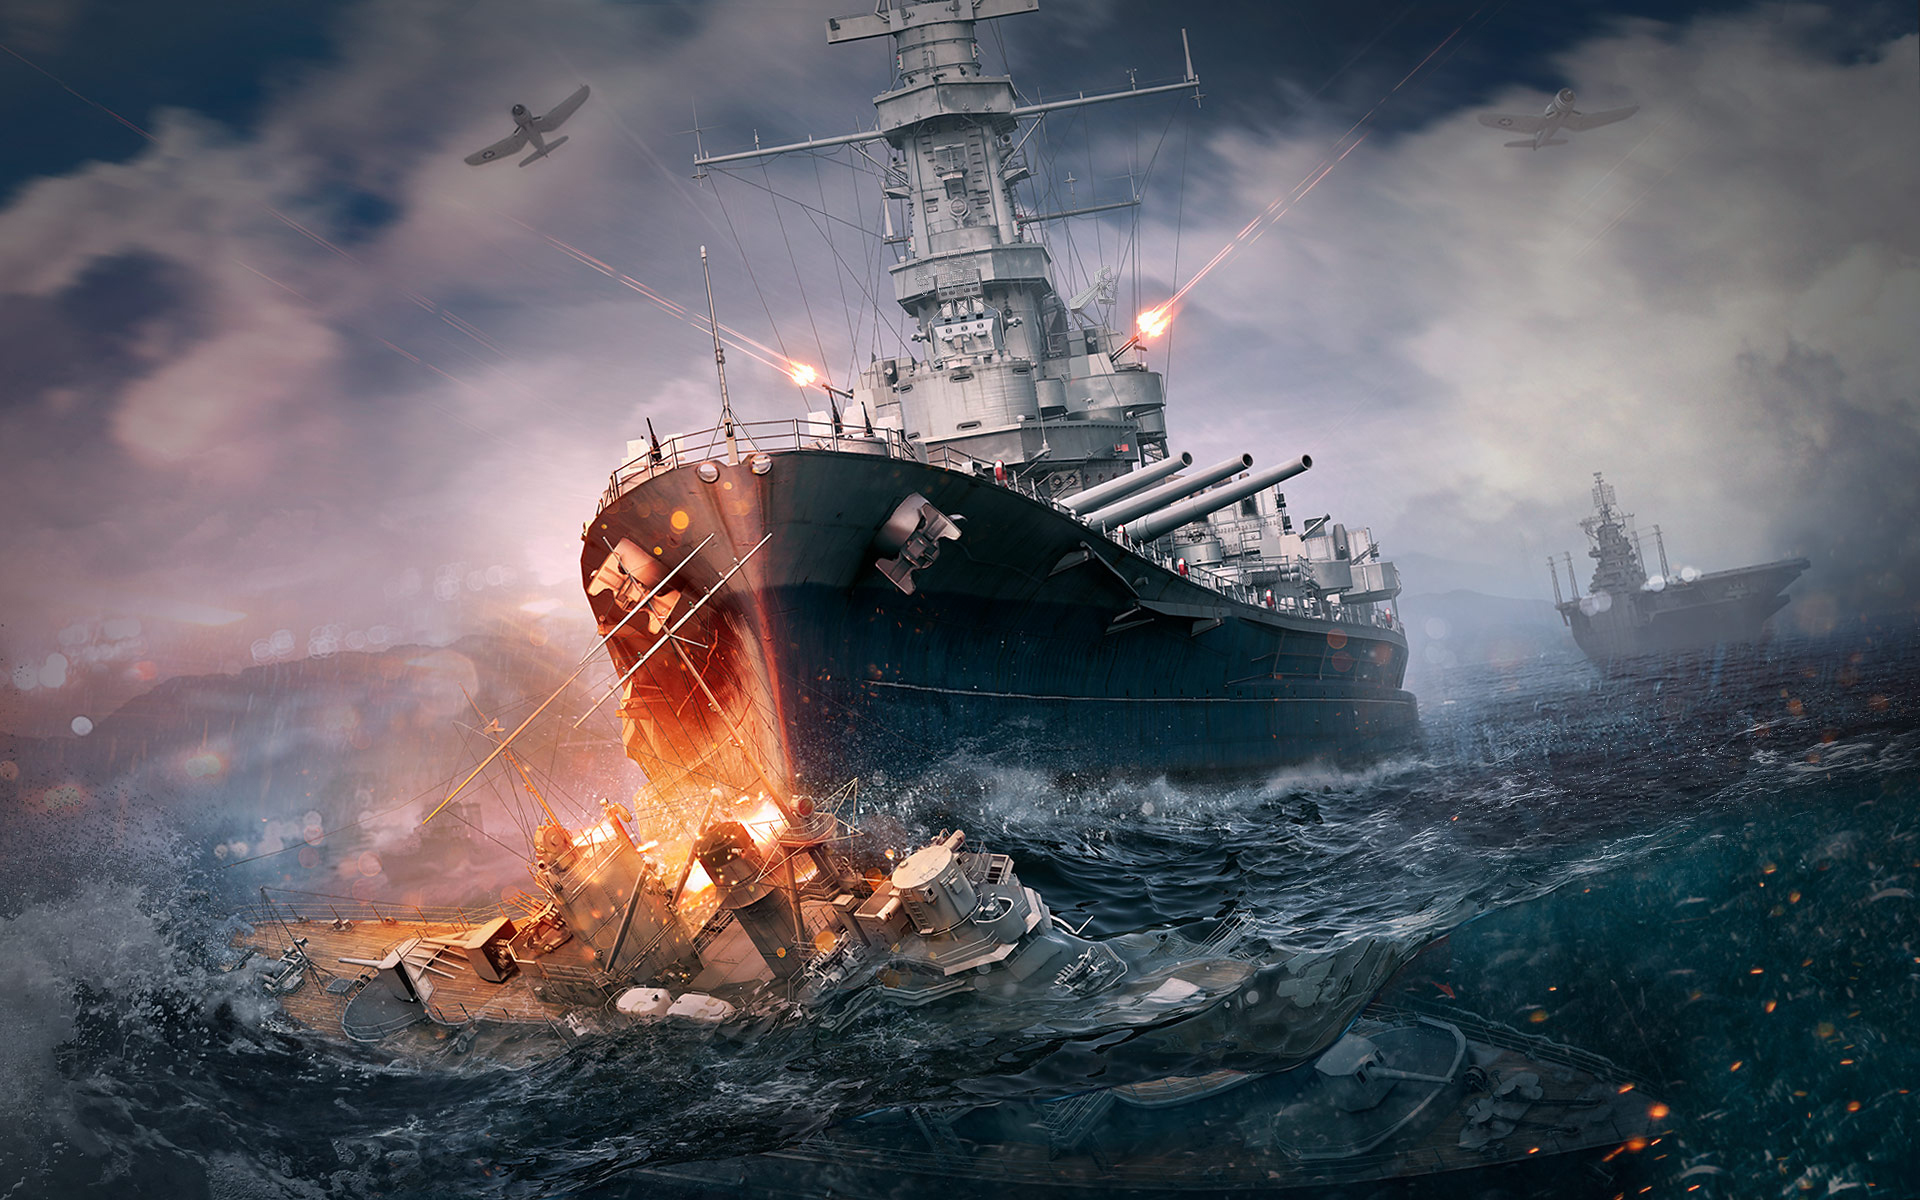 World of Warships Wallpapers